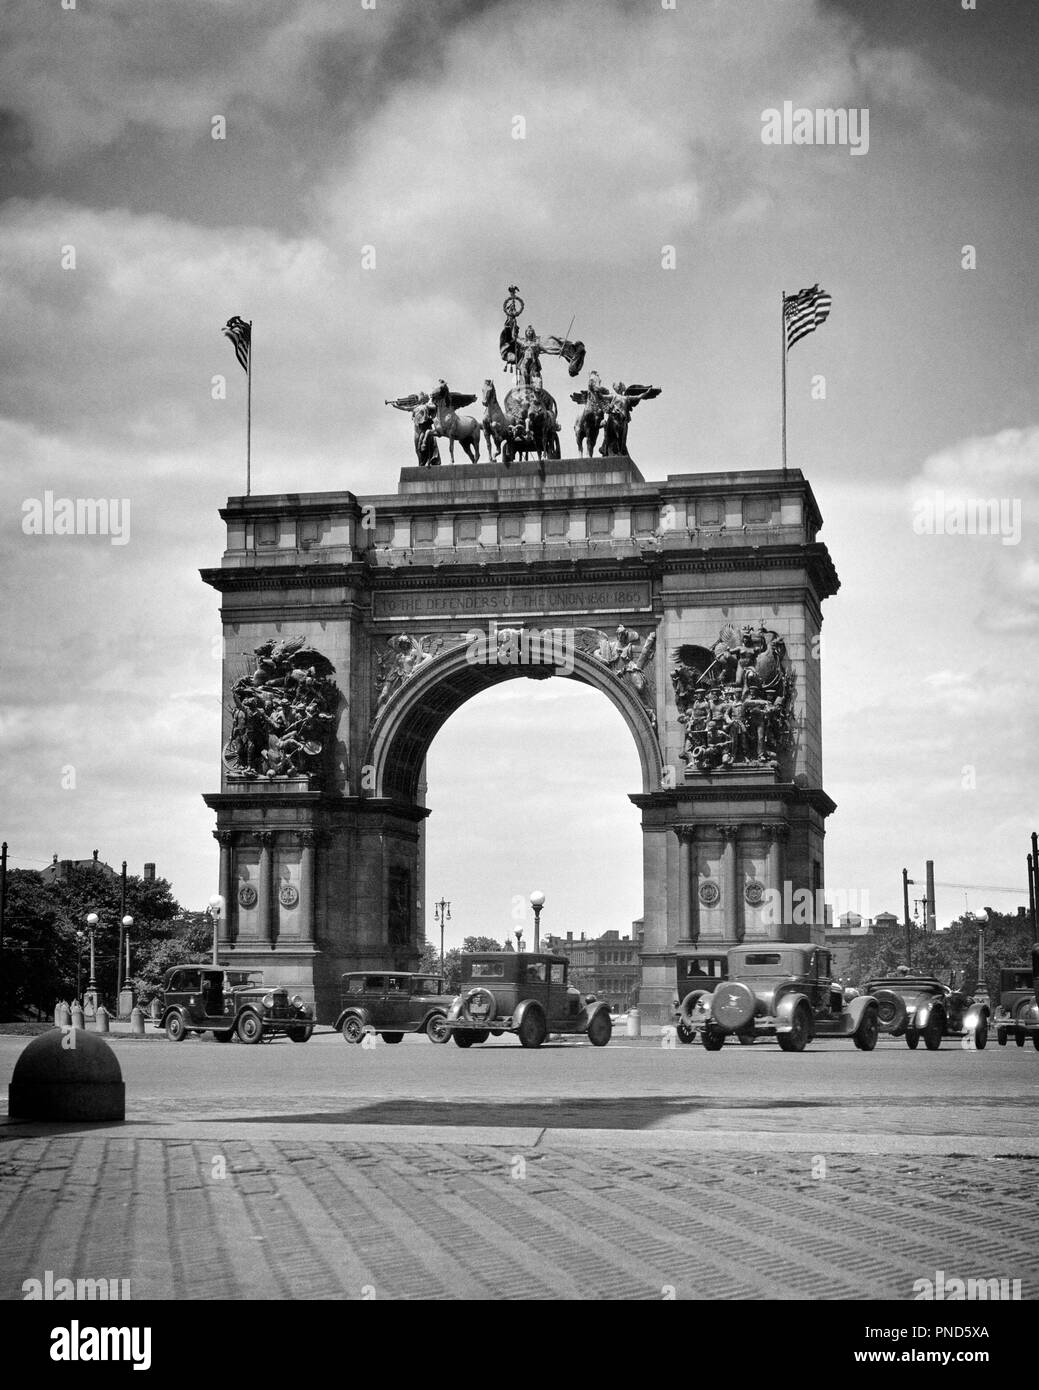 1920s THE SAILORS AND SOLDIERS ARCH IN GRAND ARMY PLAZA BROOKLYN NEW YORK USA - q49595 CPC001 HARS SCULPTOR CALVERT VAUX GRAND ARMY PLAZA AMERICAN CIVIL WAR BATTLES BLACK AND WHITE CIVIL WAR CONFLICTS FREDERICK LAW OLMSTED OLD FASHIONED Stock Photo